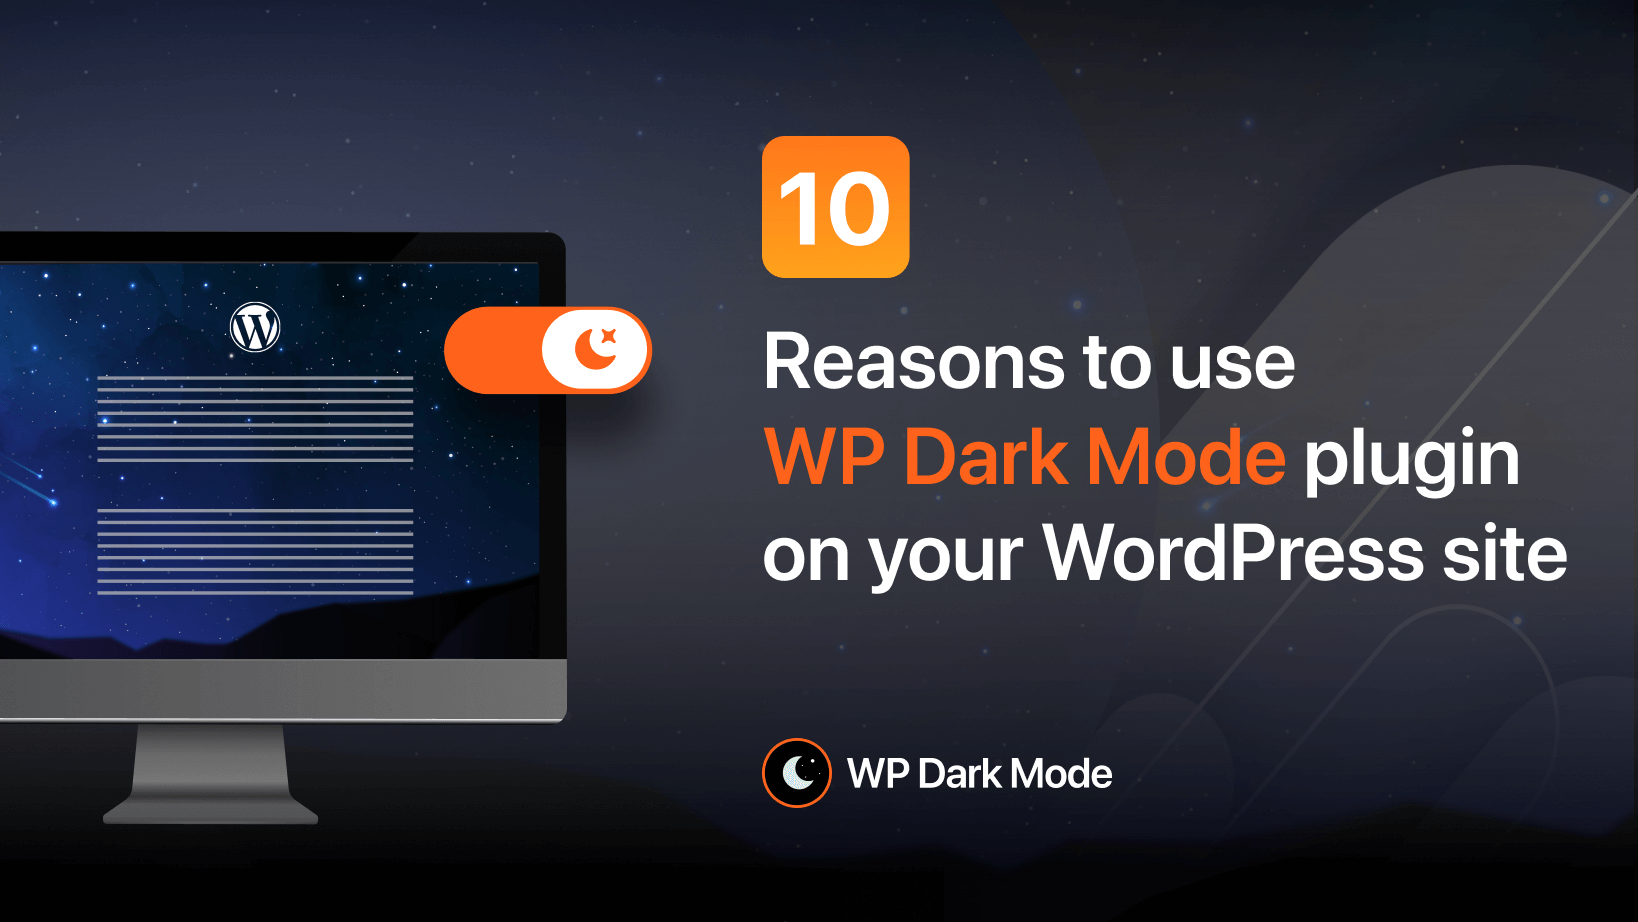 10 reasons to use WP Dark Mode plugin on your site